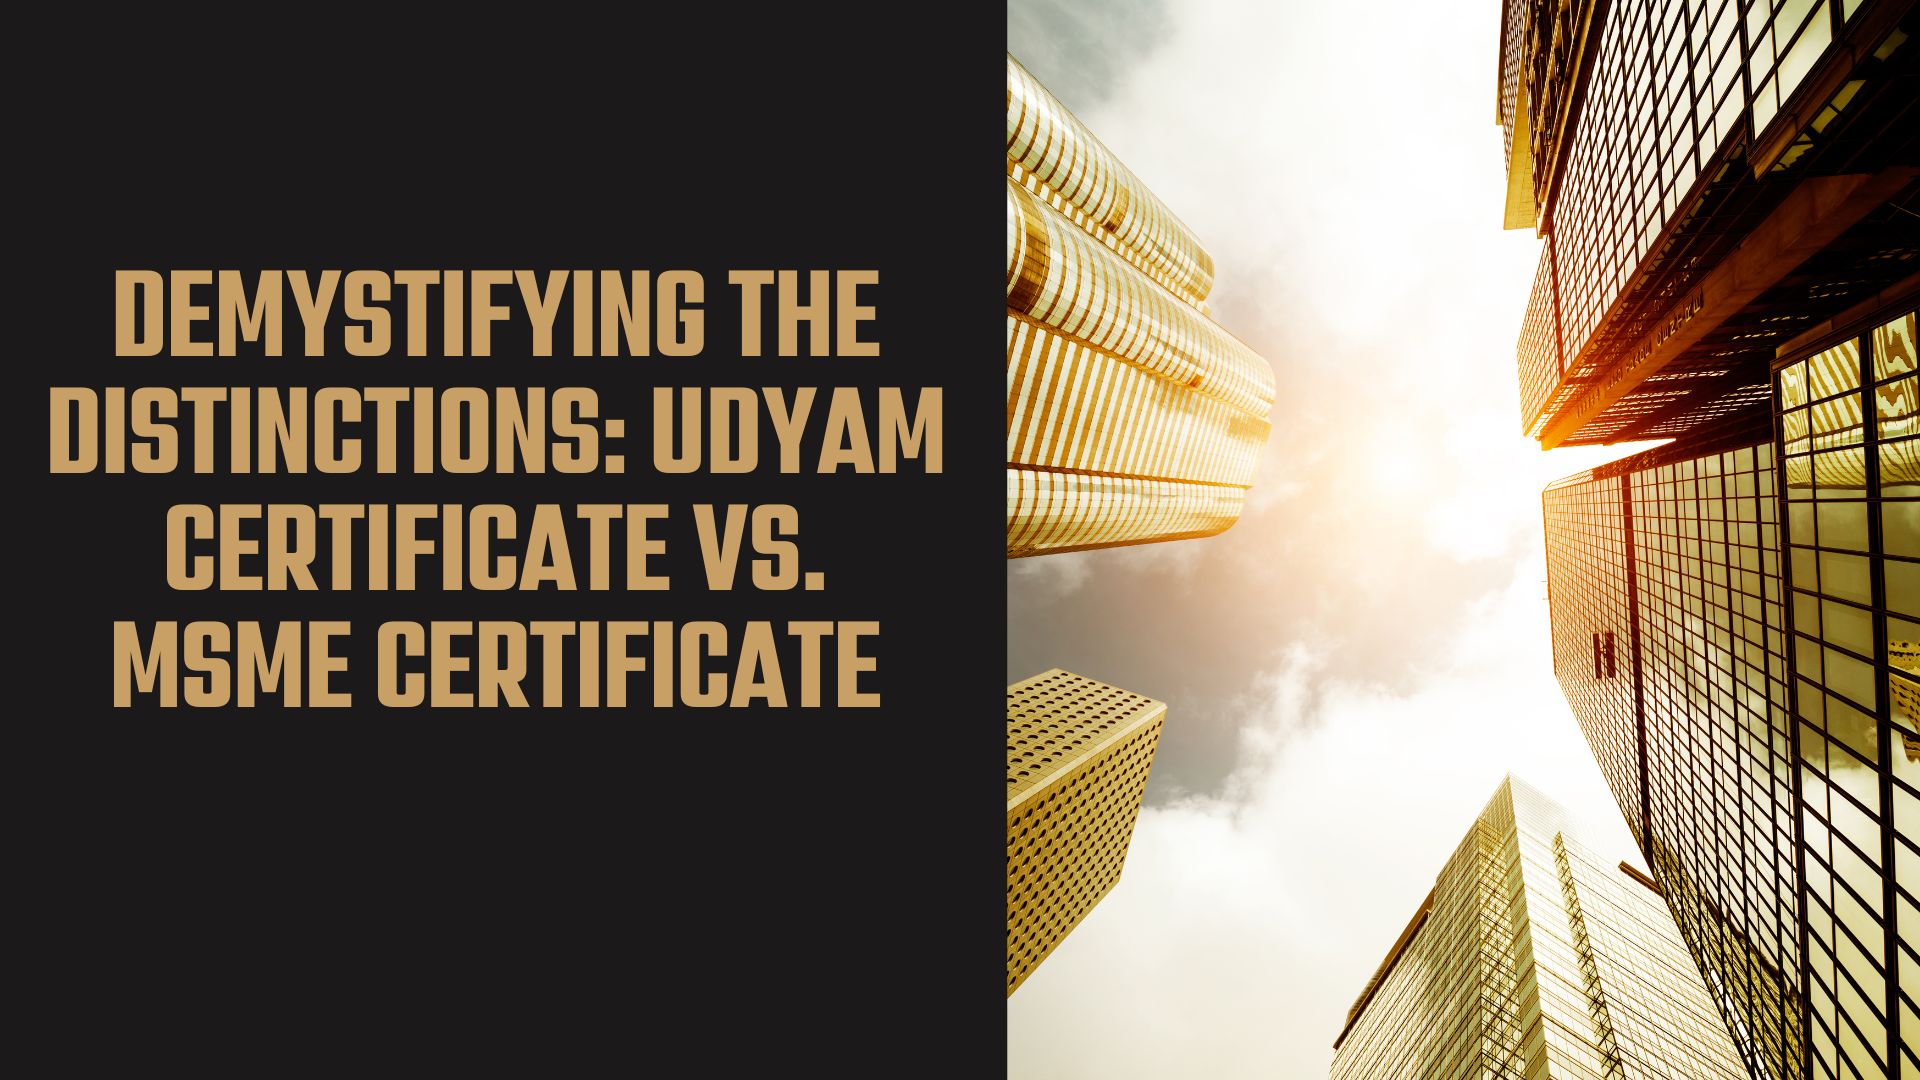 Demystifying the Distinctions: Udyam Certificate vs. MSME Certificate